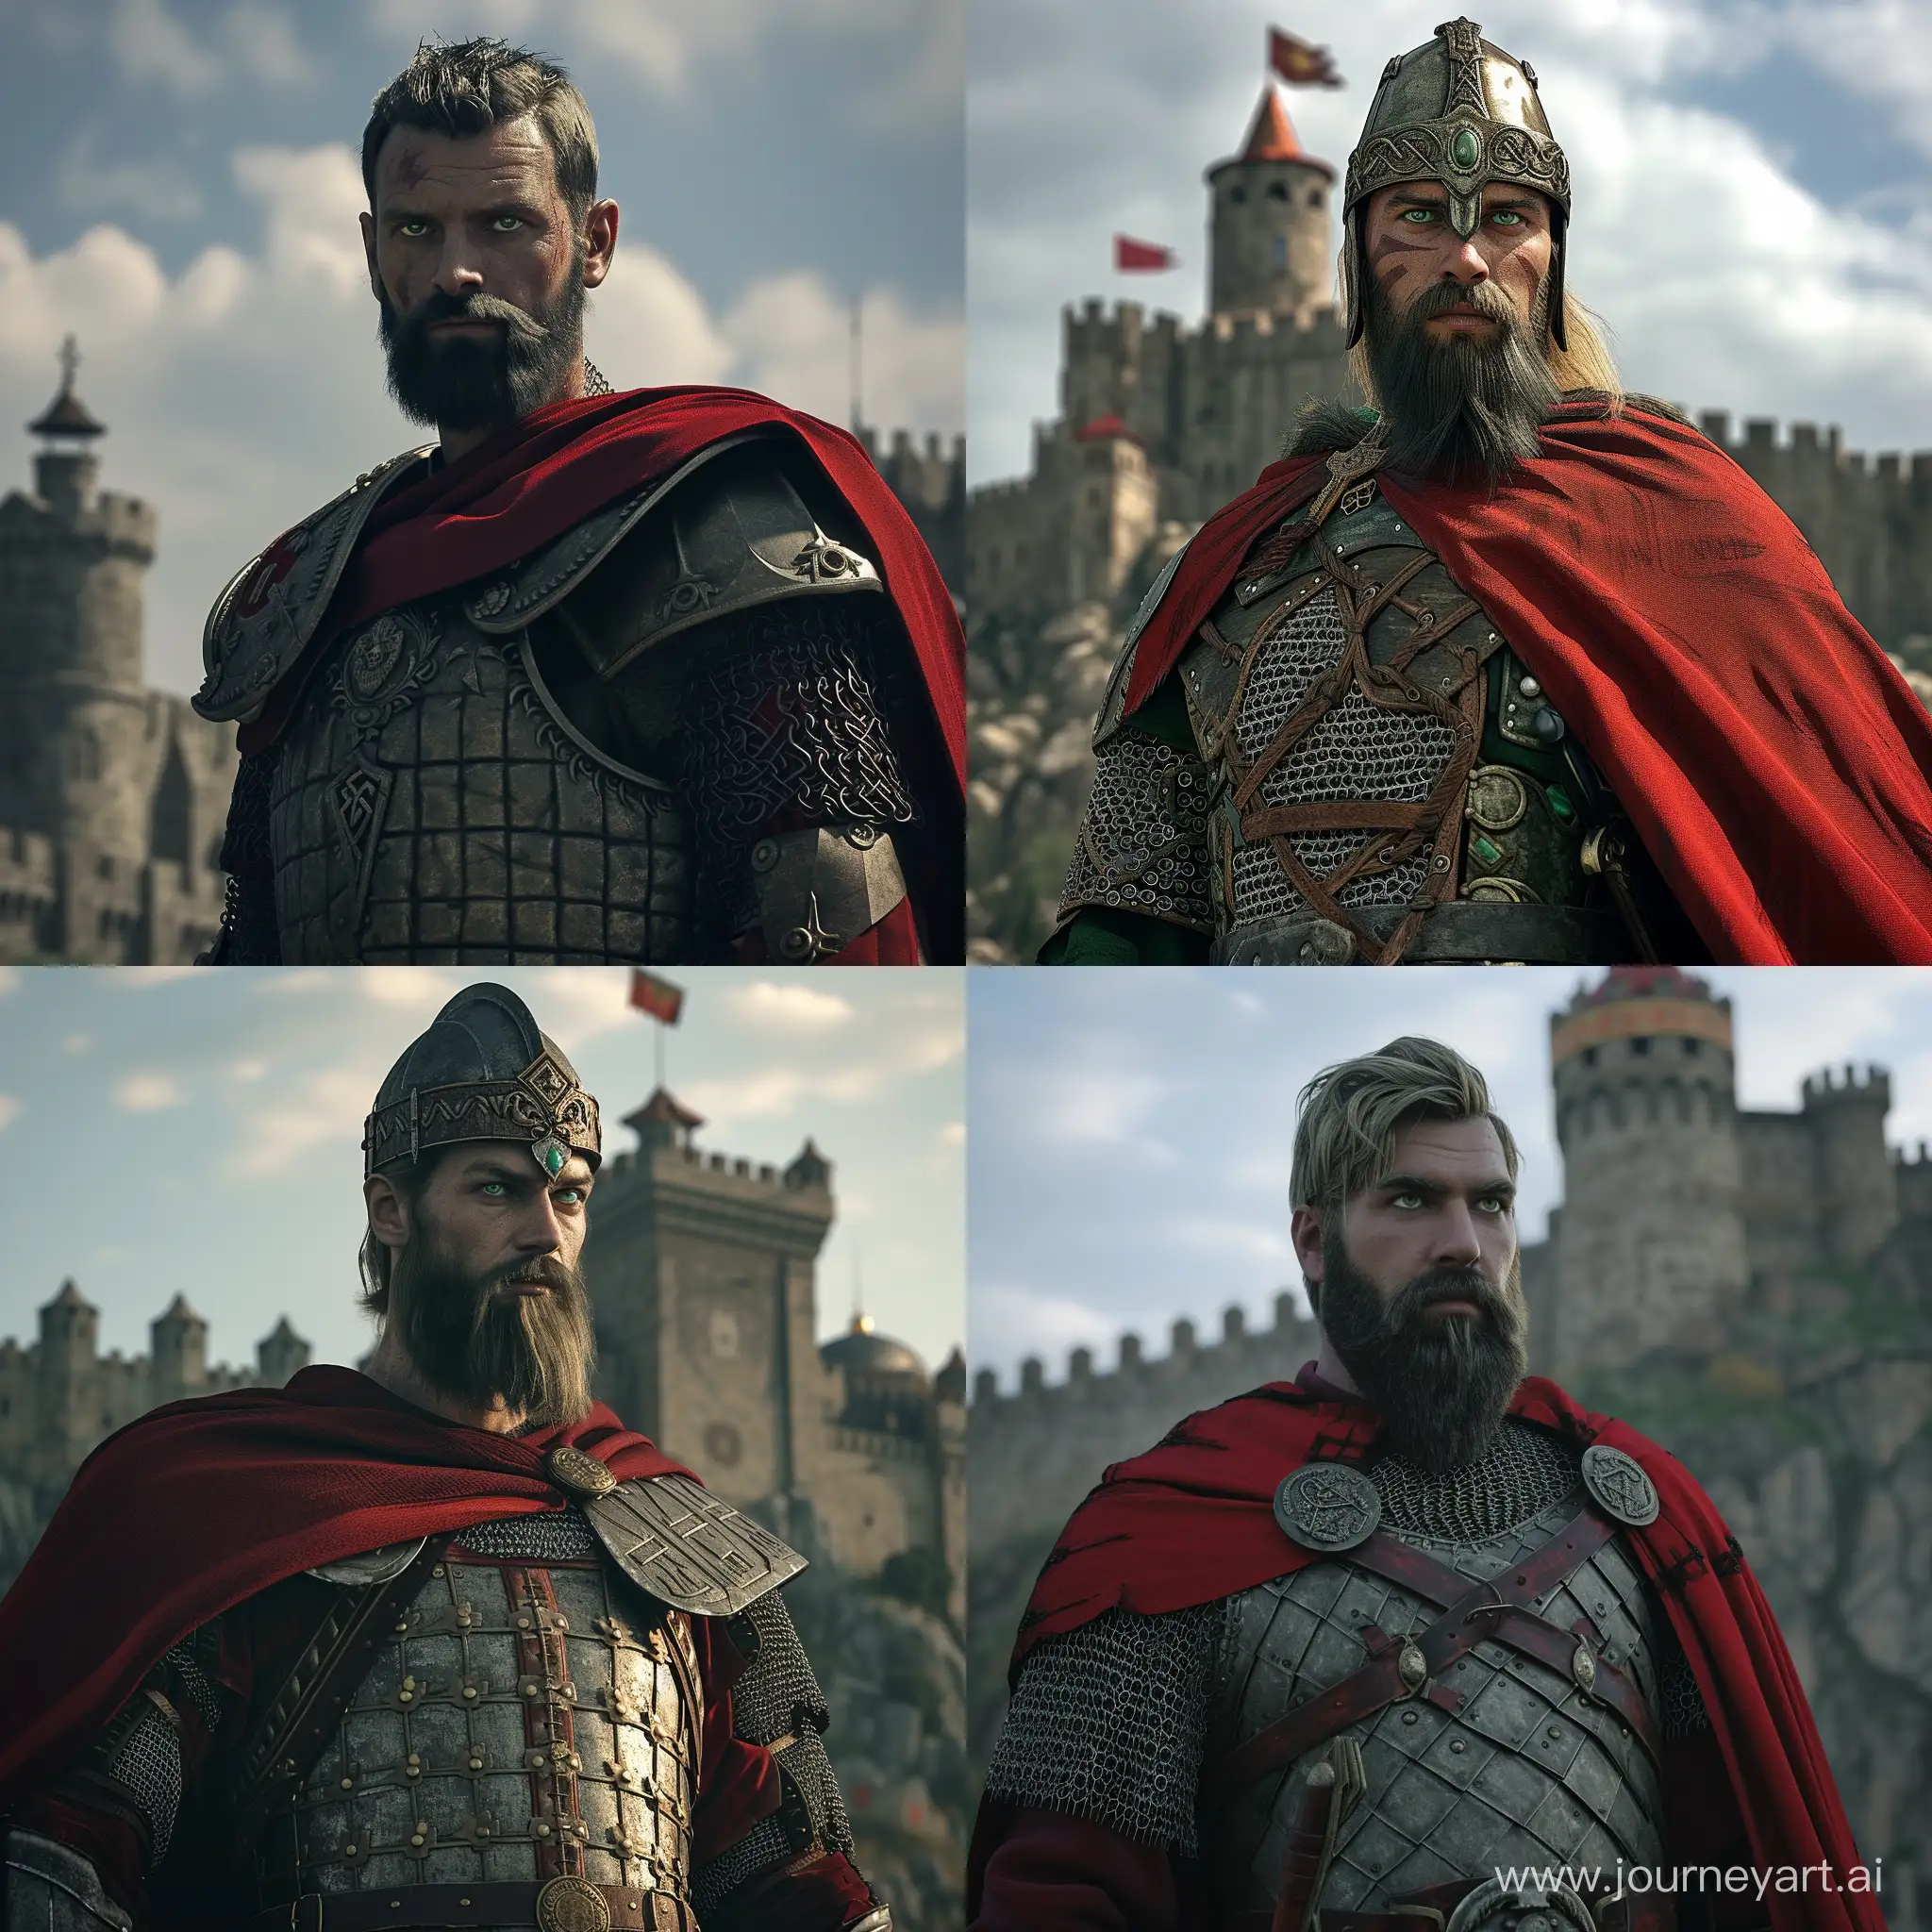 Rurik-Kievan-Rus-Chieftain-Stands-Proud-Before-a-Castle-in-Cinematic-Ultra-Realistic-Shot